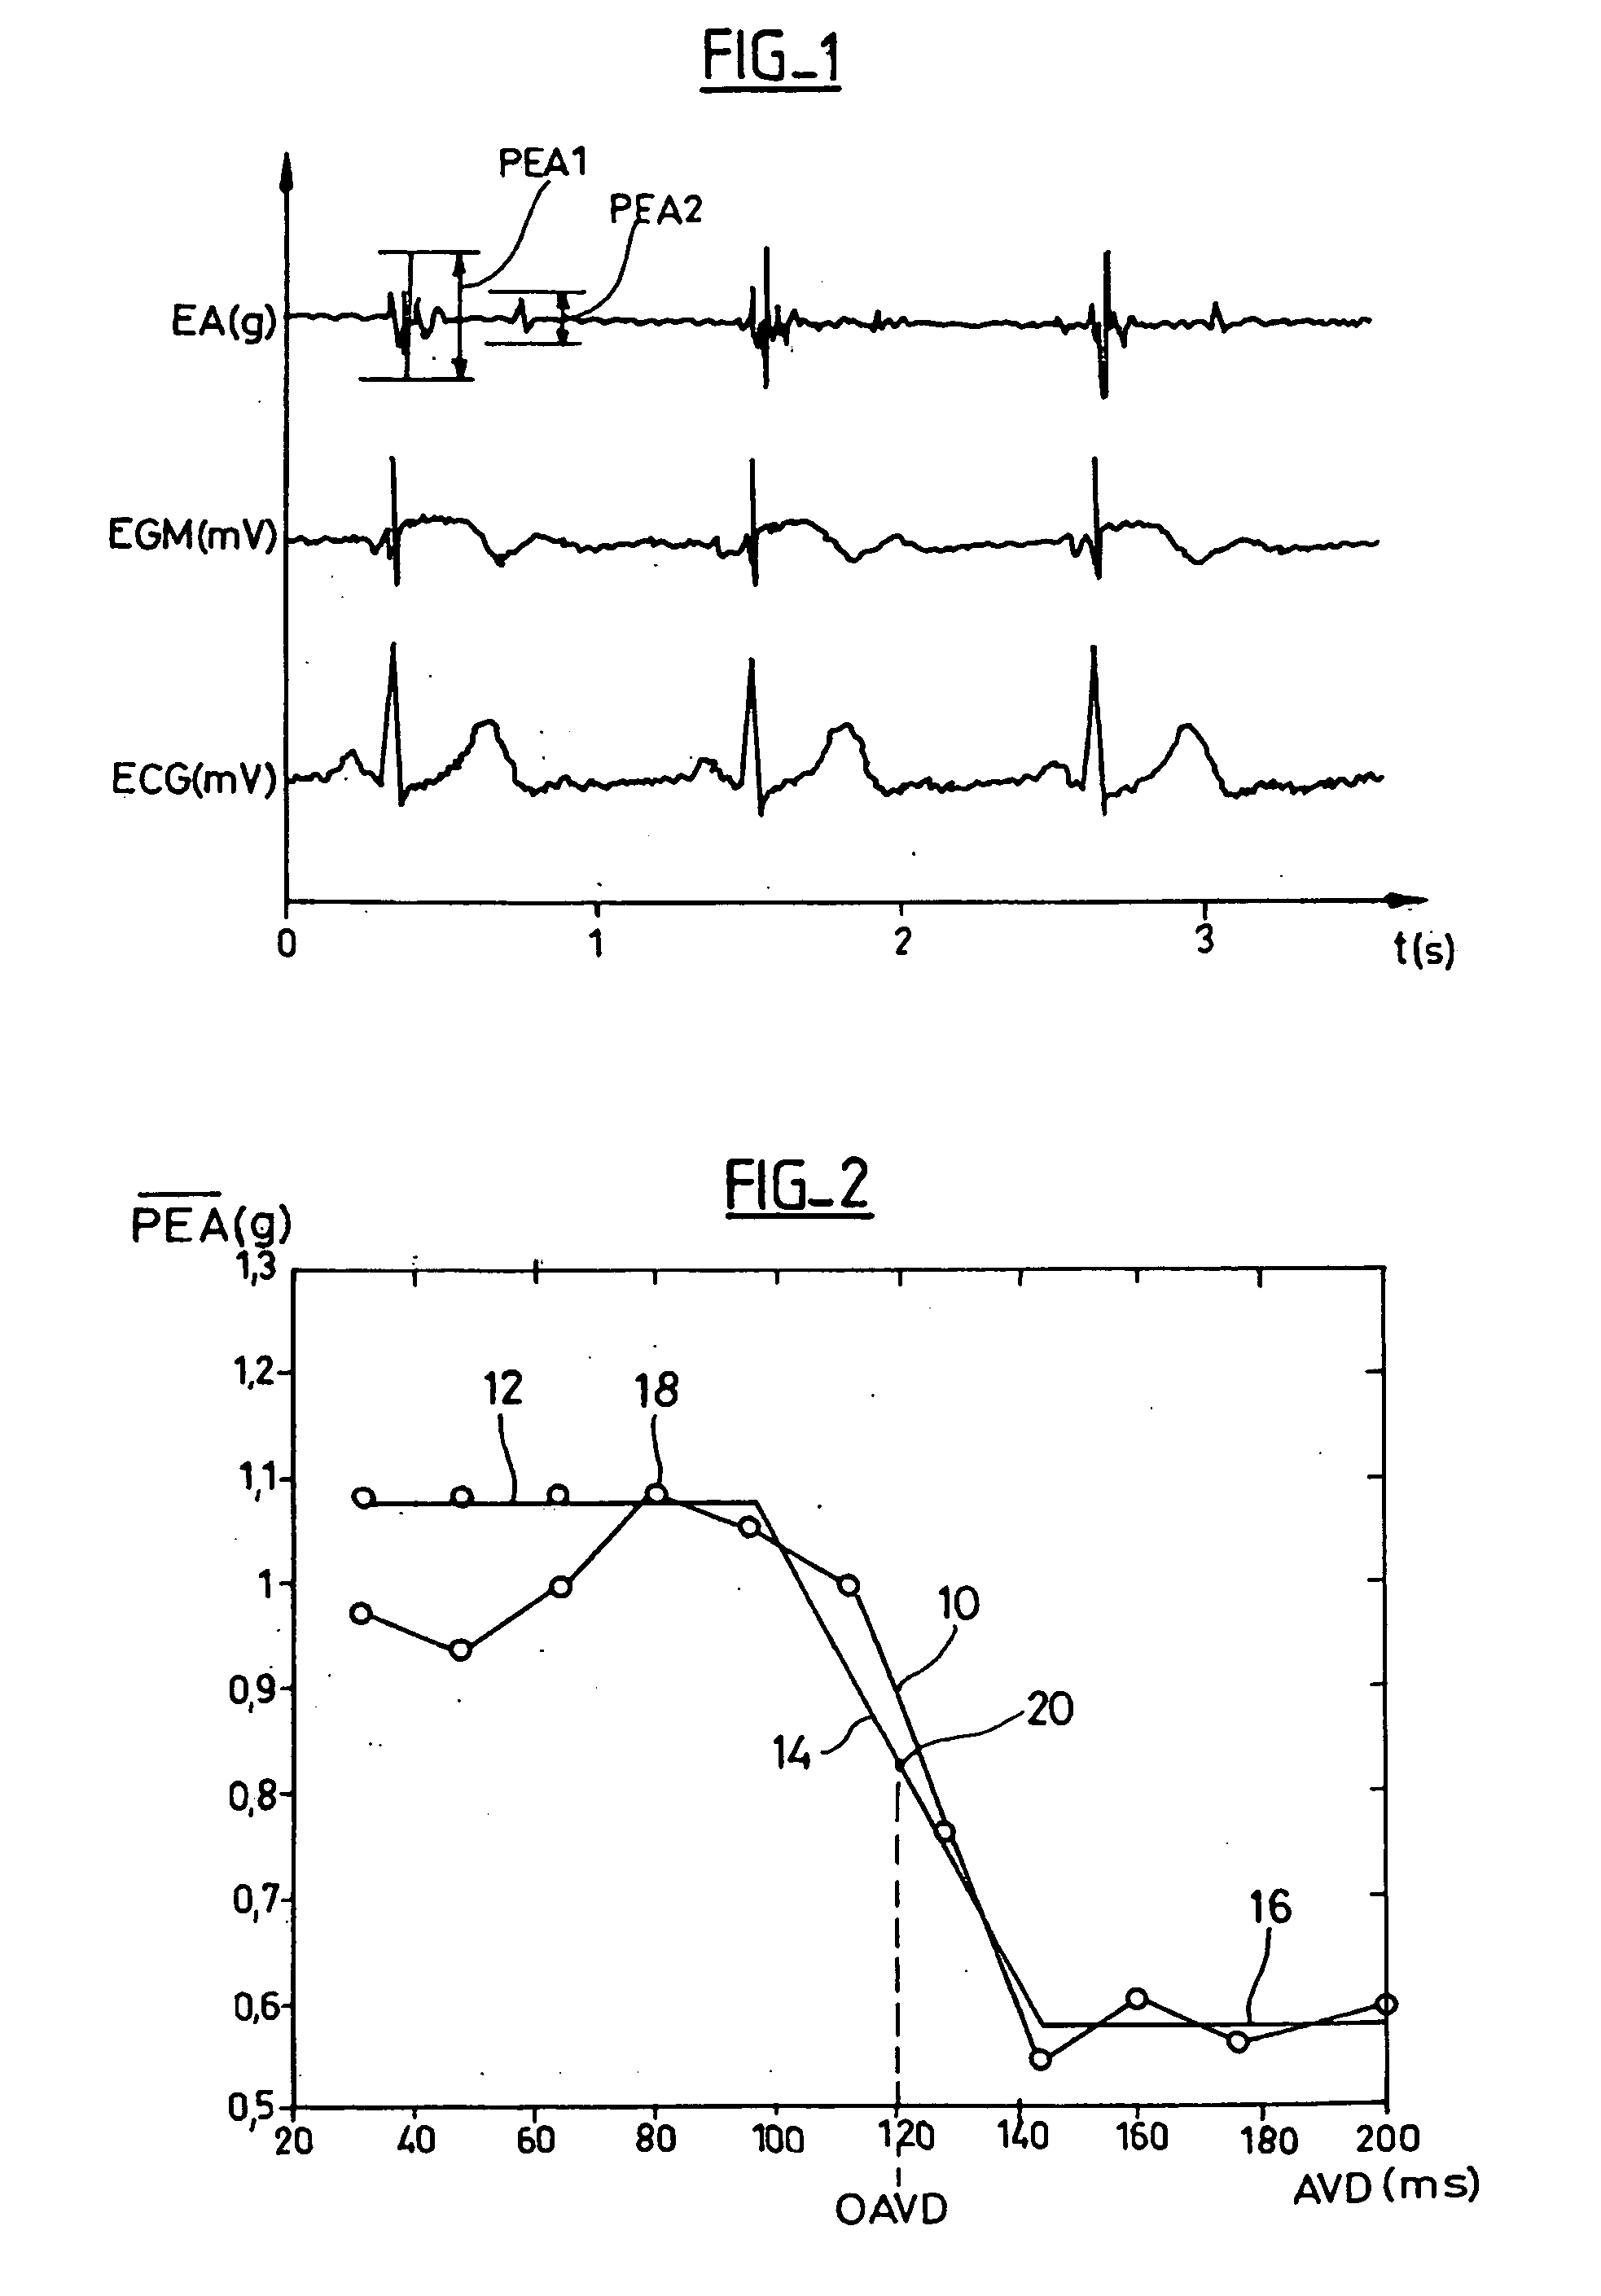 Device For Characterizing the Cardiac Status Of A Patient Equipped With A Biventricular Pacing Active Implant